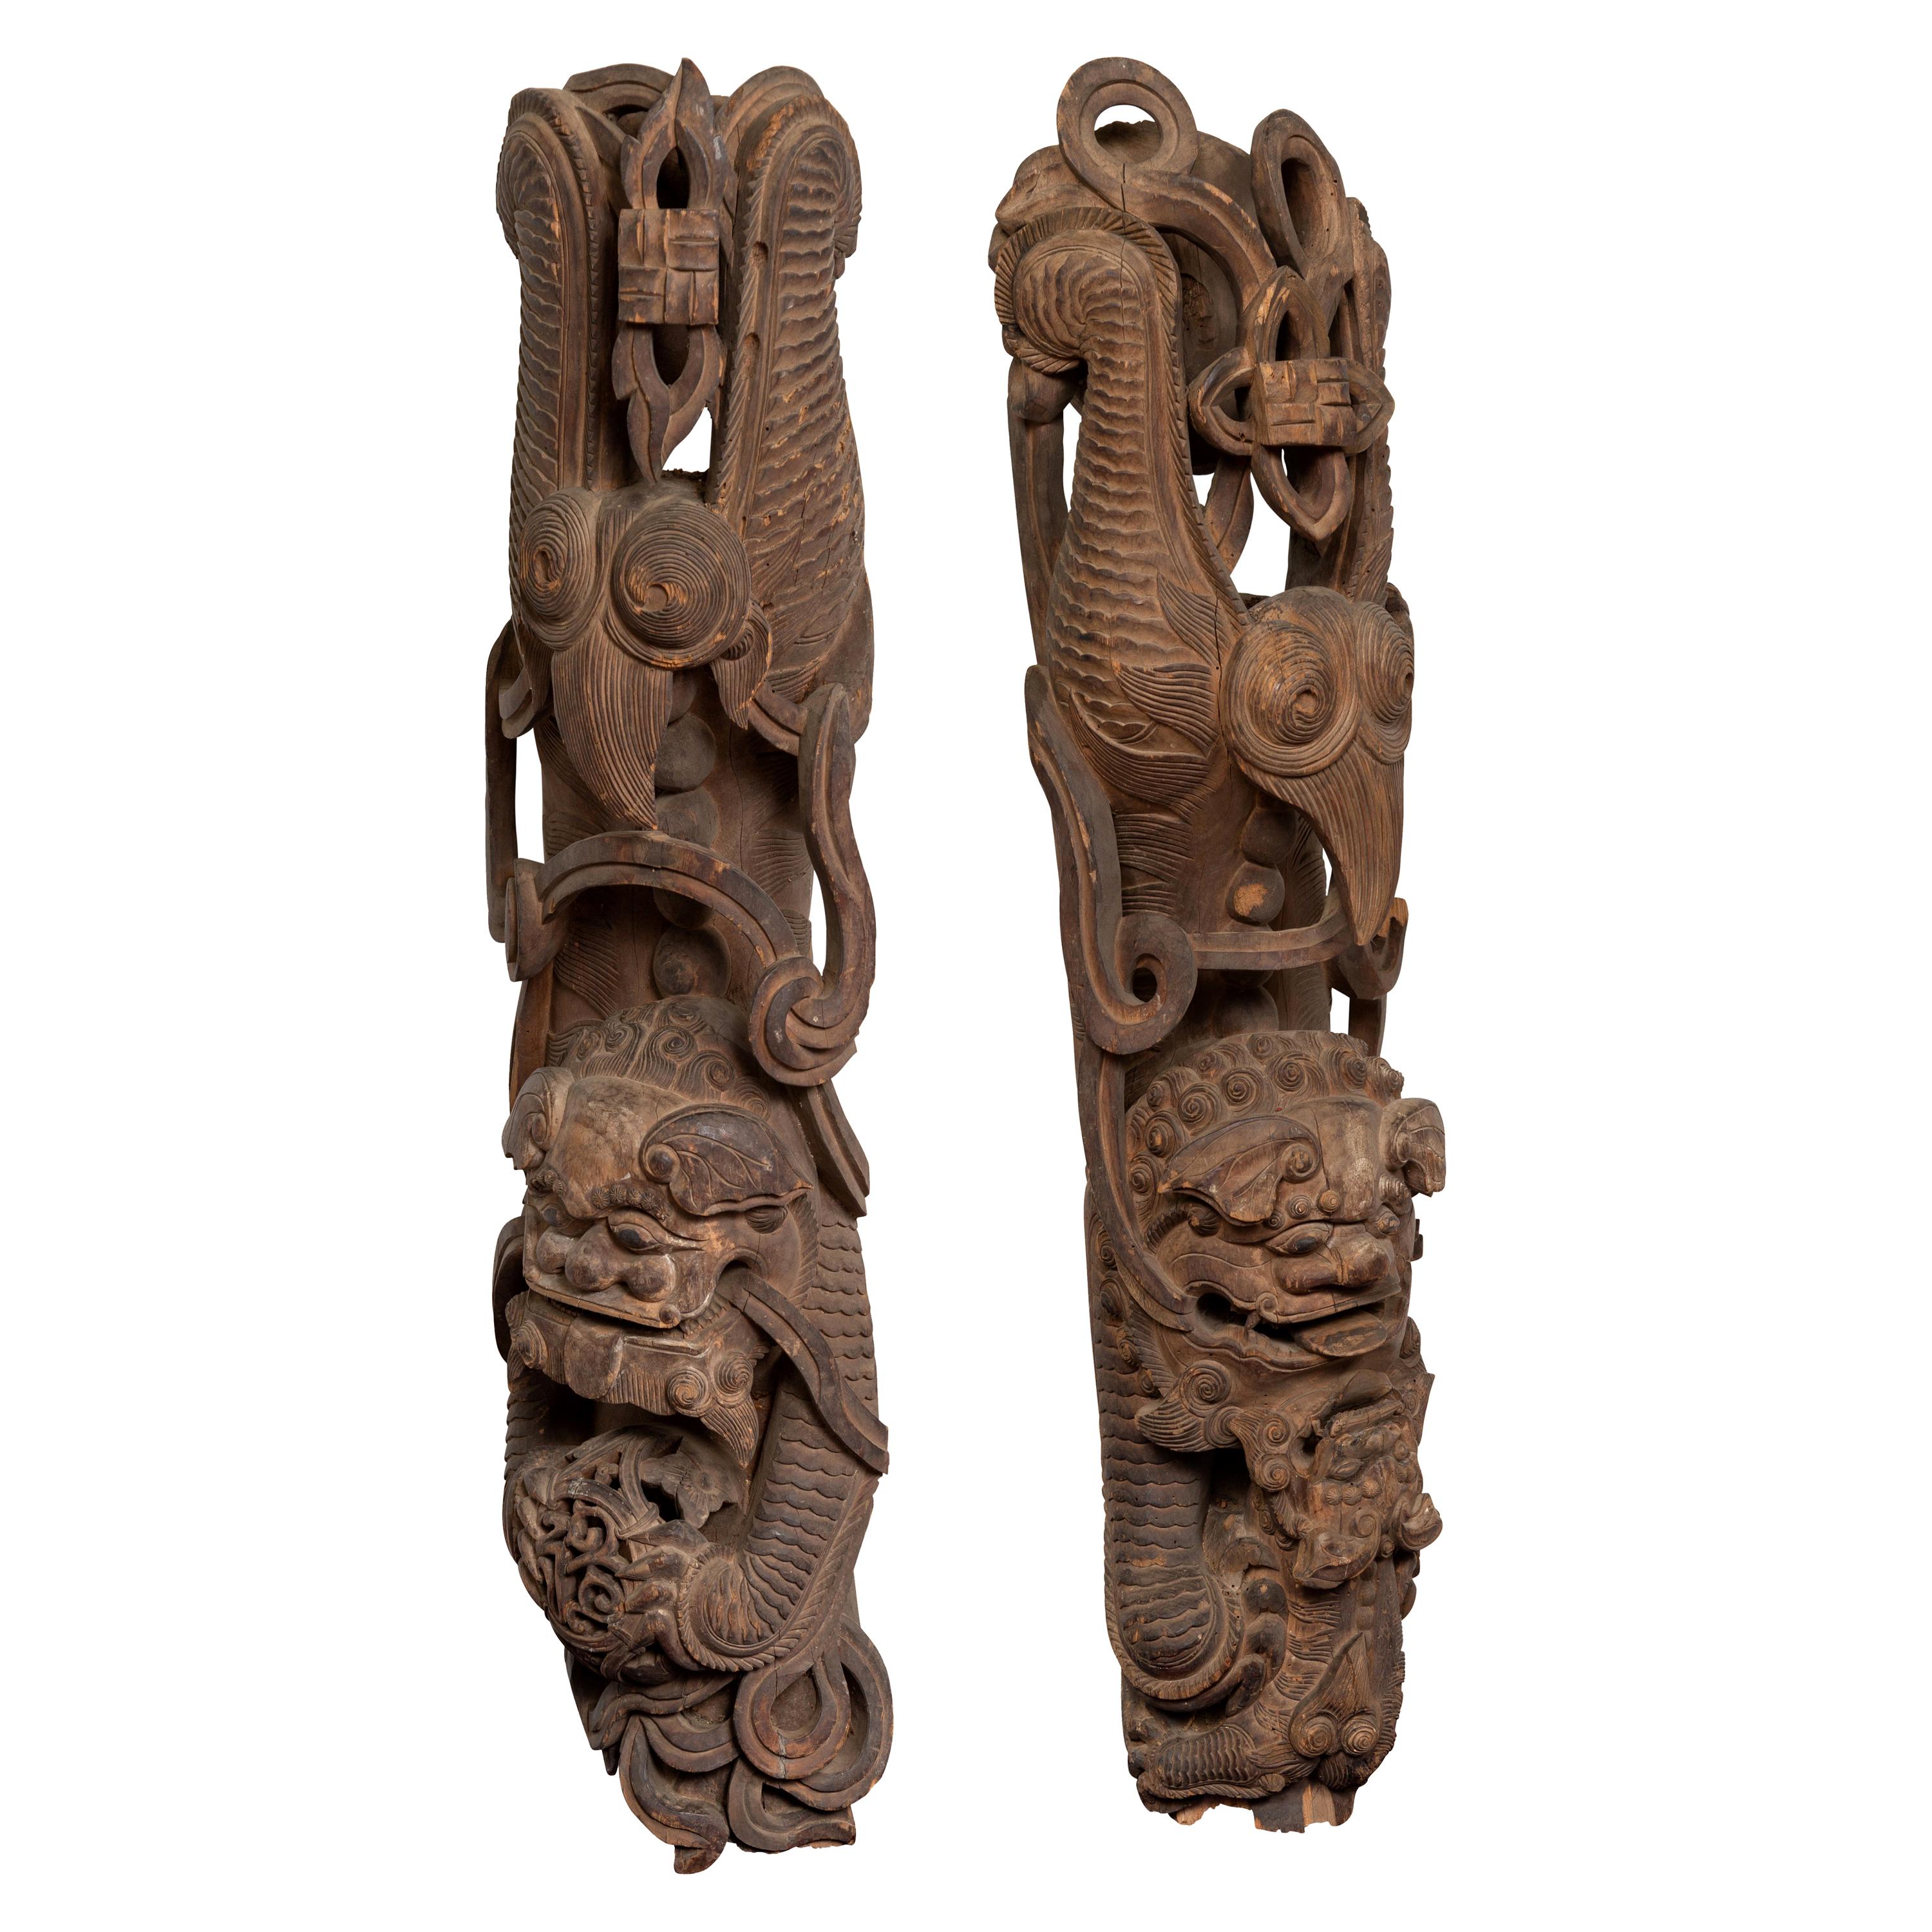 Pair of 19th Century Chinese Guardian Lions Wood Carvings from a Temple Wall